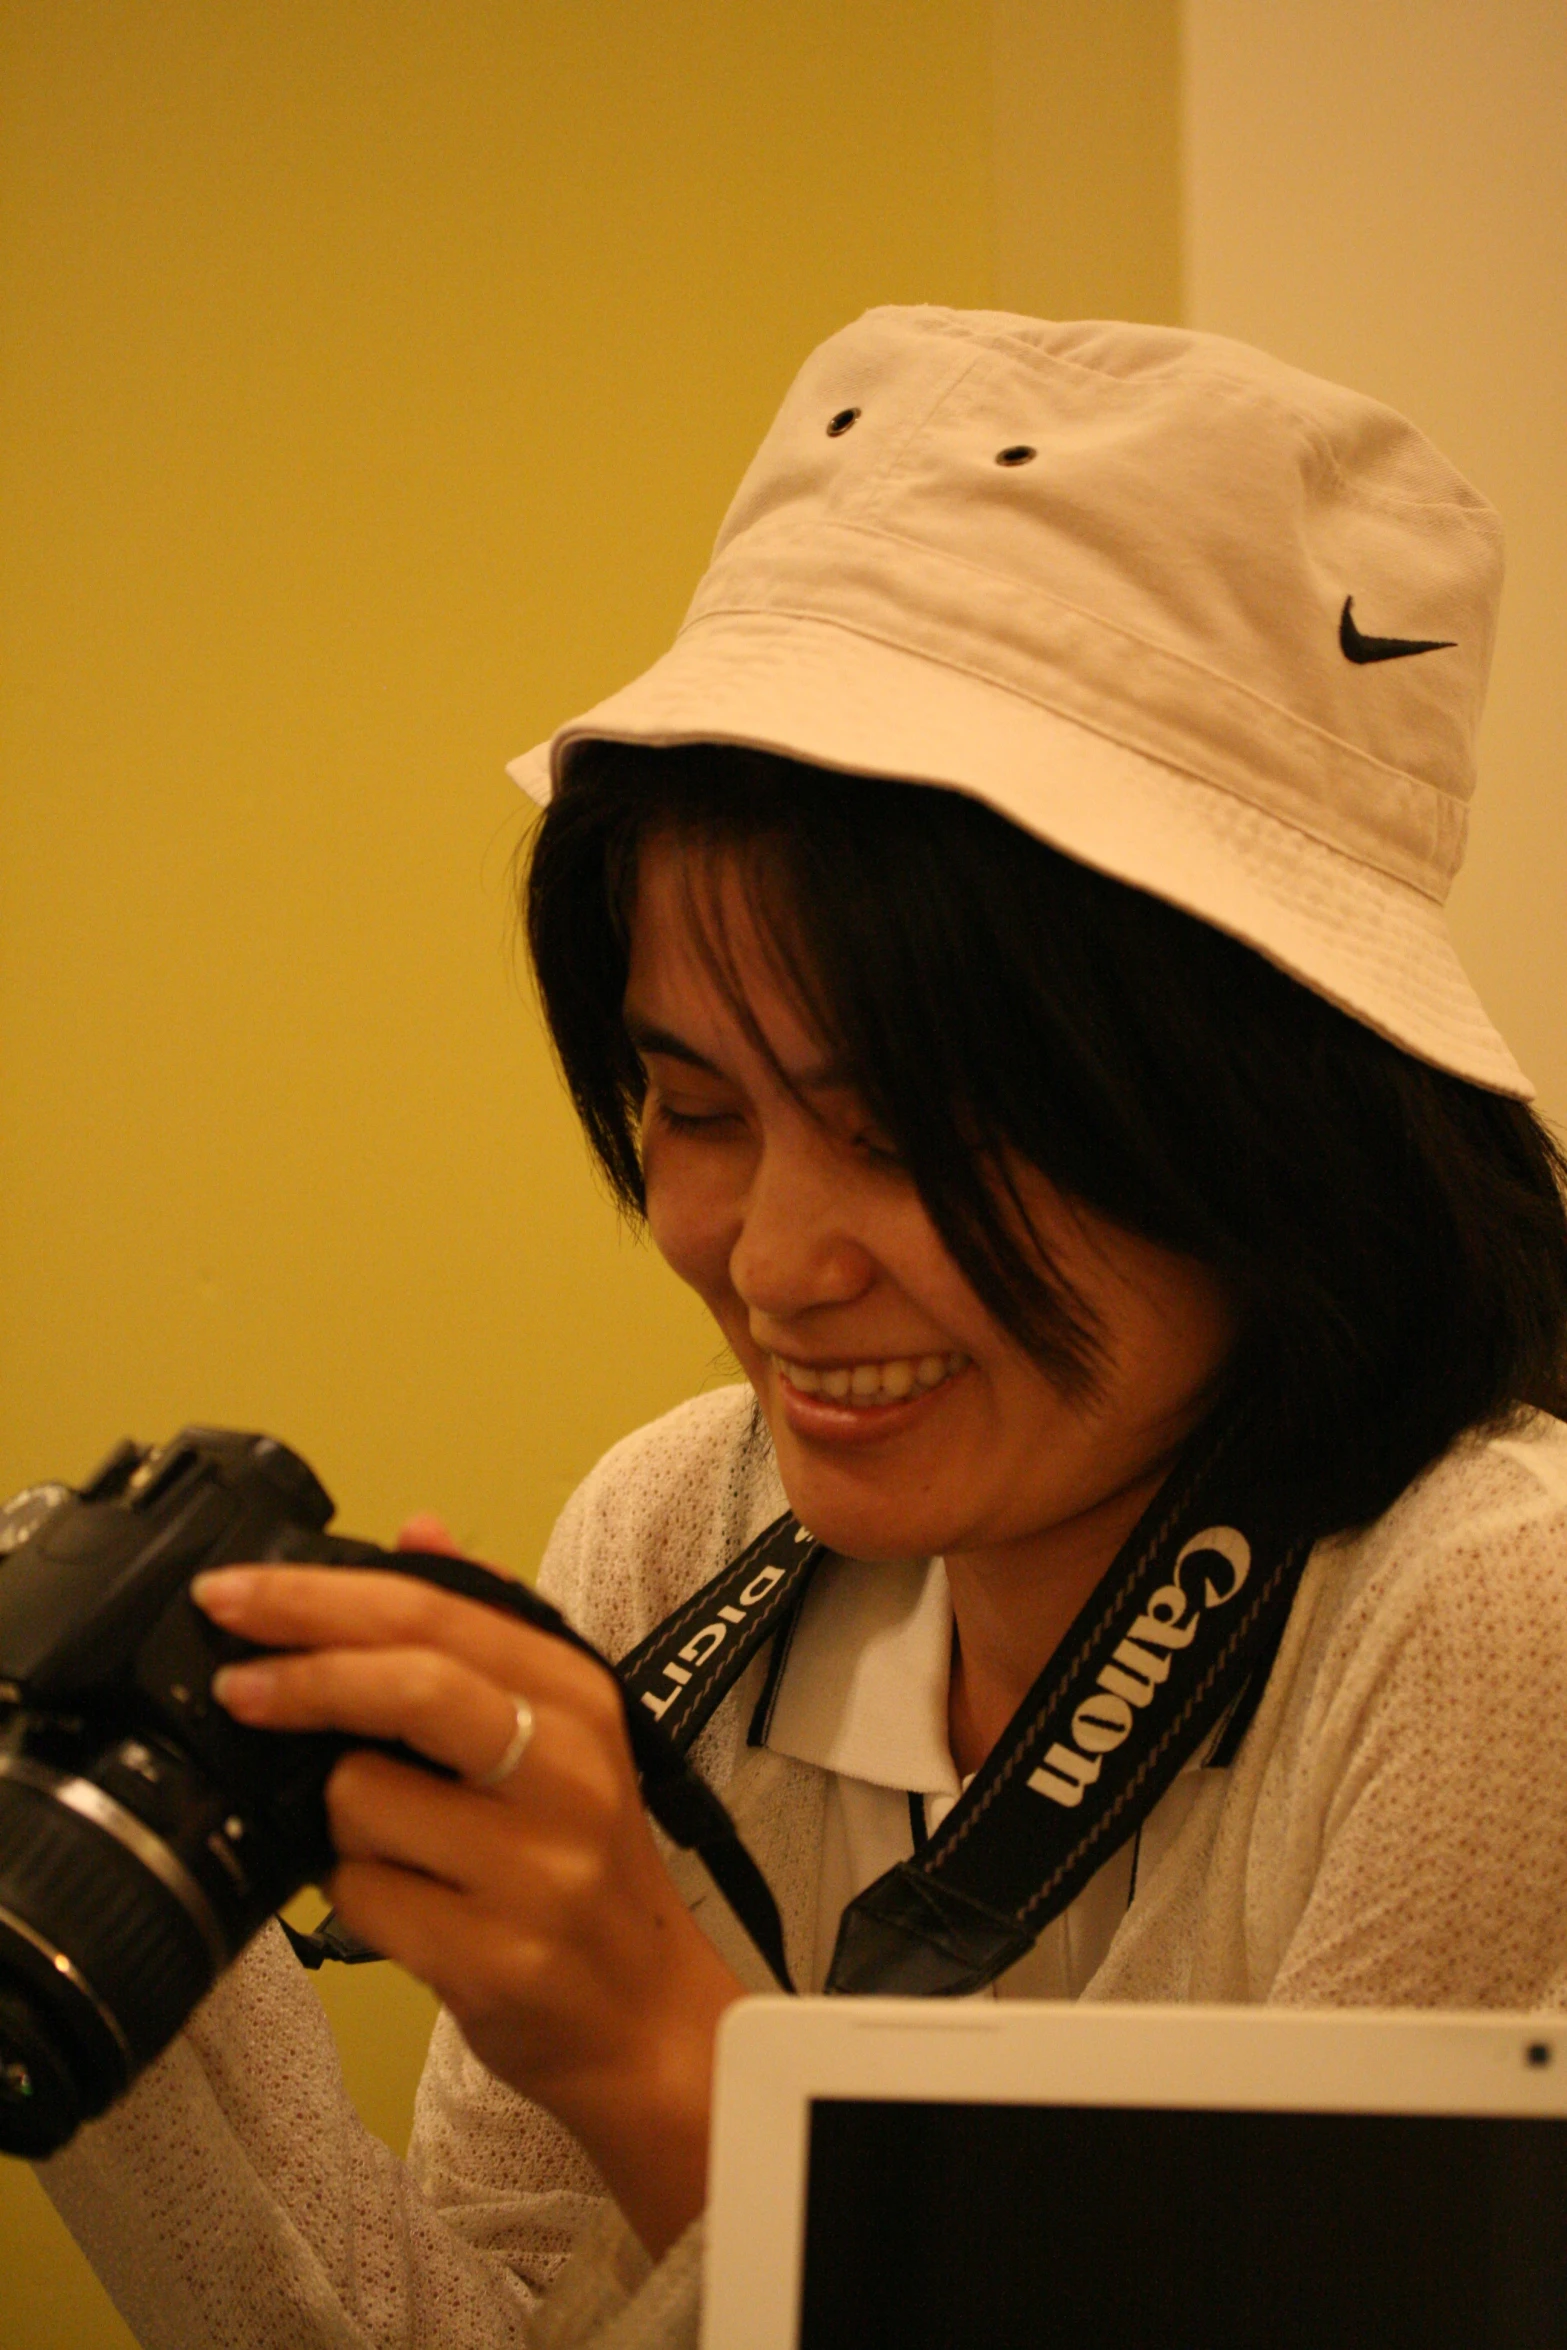 a smiling woman with a camera attached to her shoulder